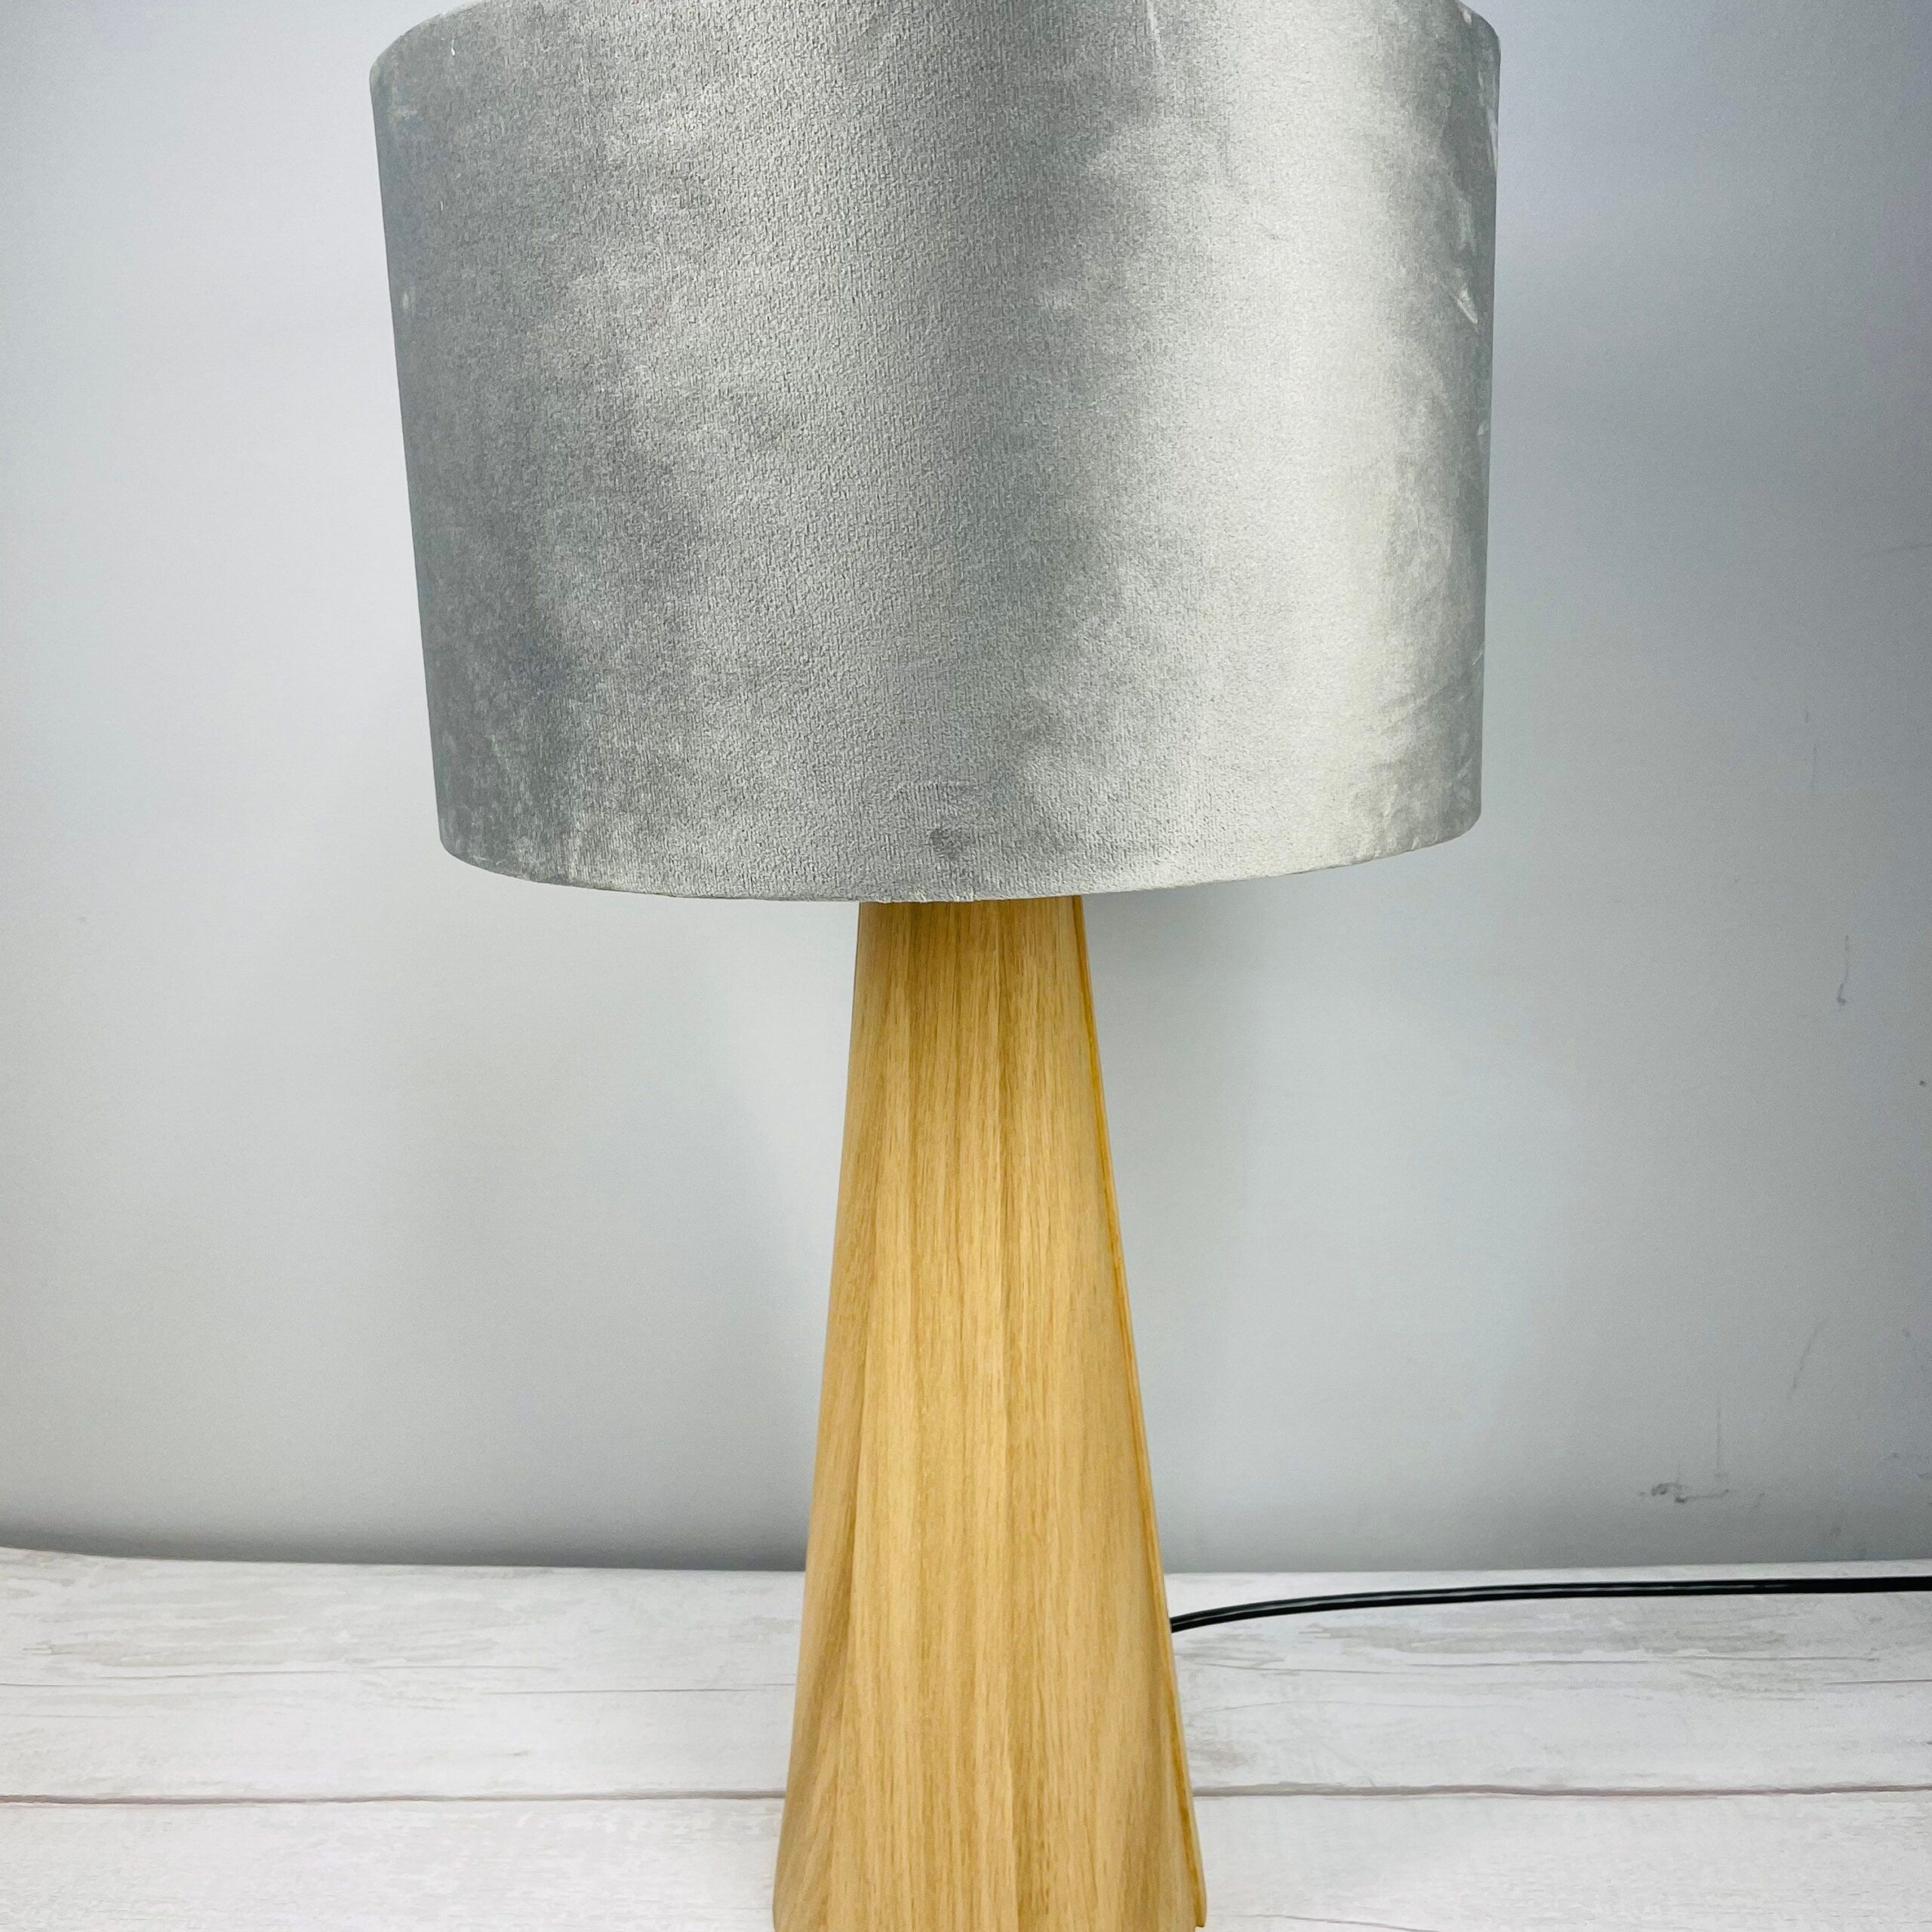 Choose Wooden Table Lamps Enhance Your Home Décor with Stunning Wooden Table Lamps